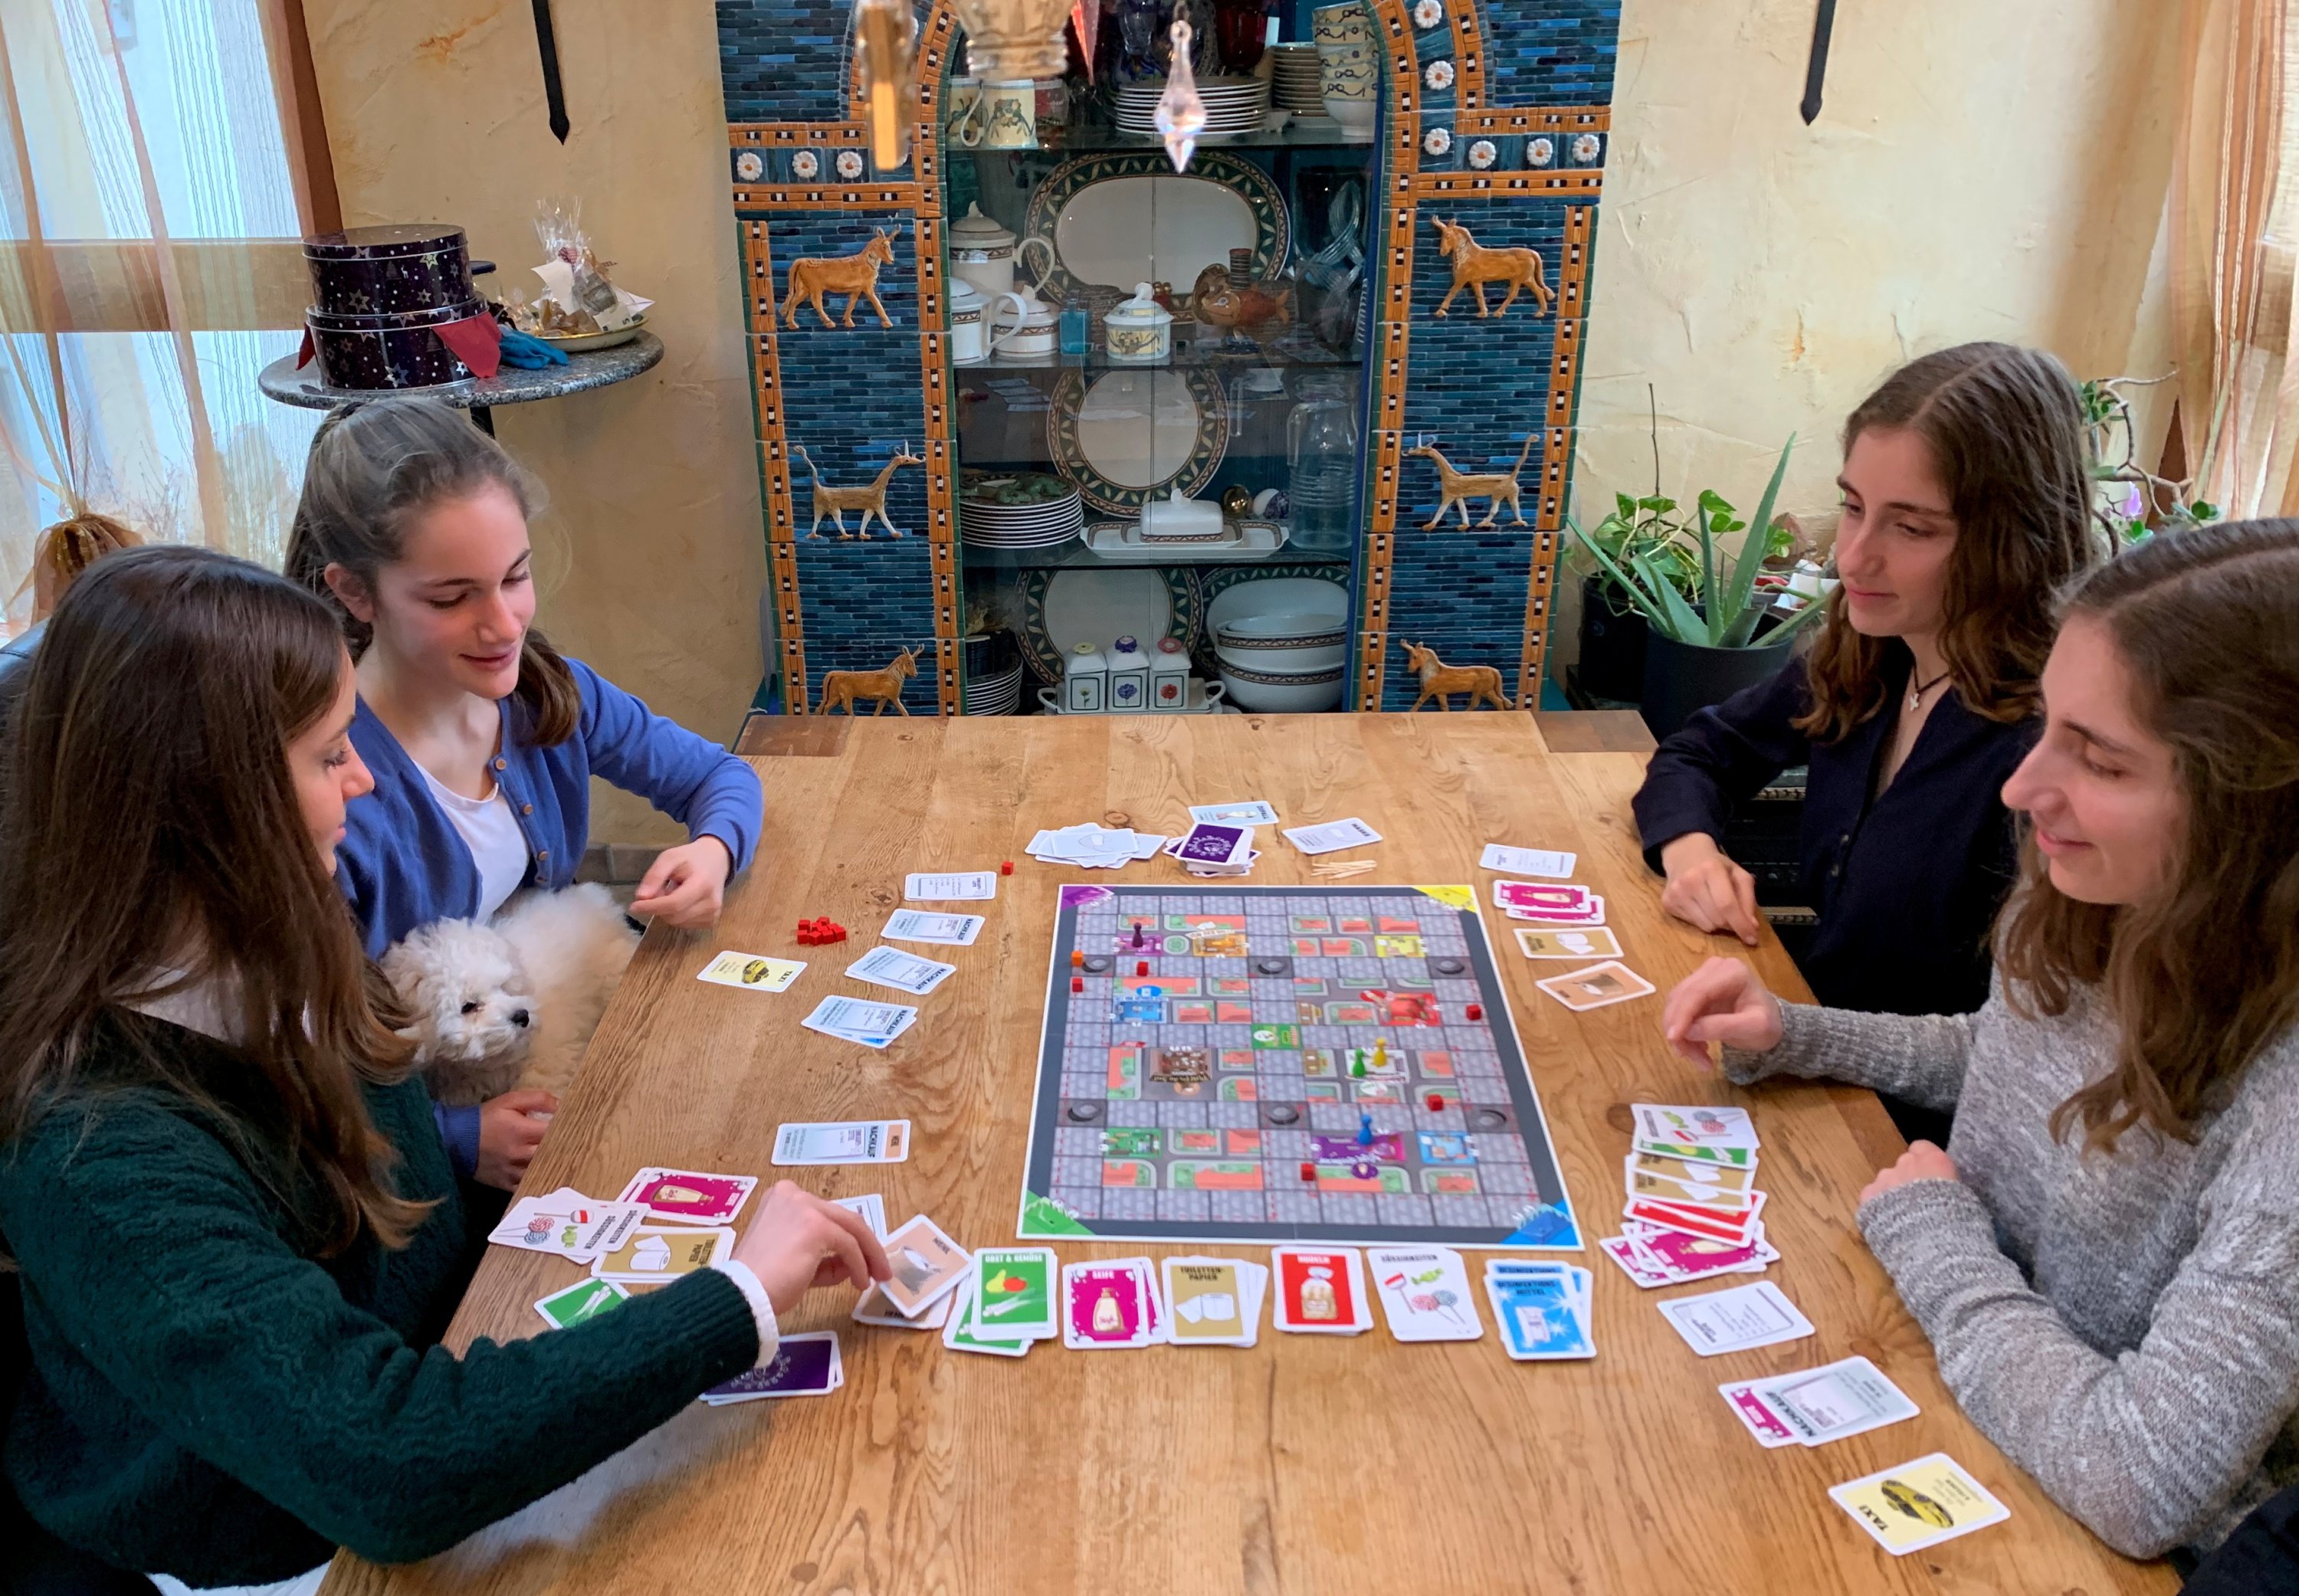 German sisters invent a coronavirus board game to play during the Christmas shutdown, in Wiesbaden Biebrich, Germany, Dec. 20, 2020. (REUTERS/Annkathrin Weiss)